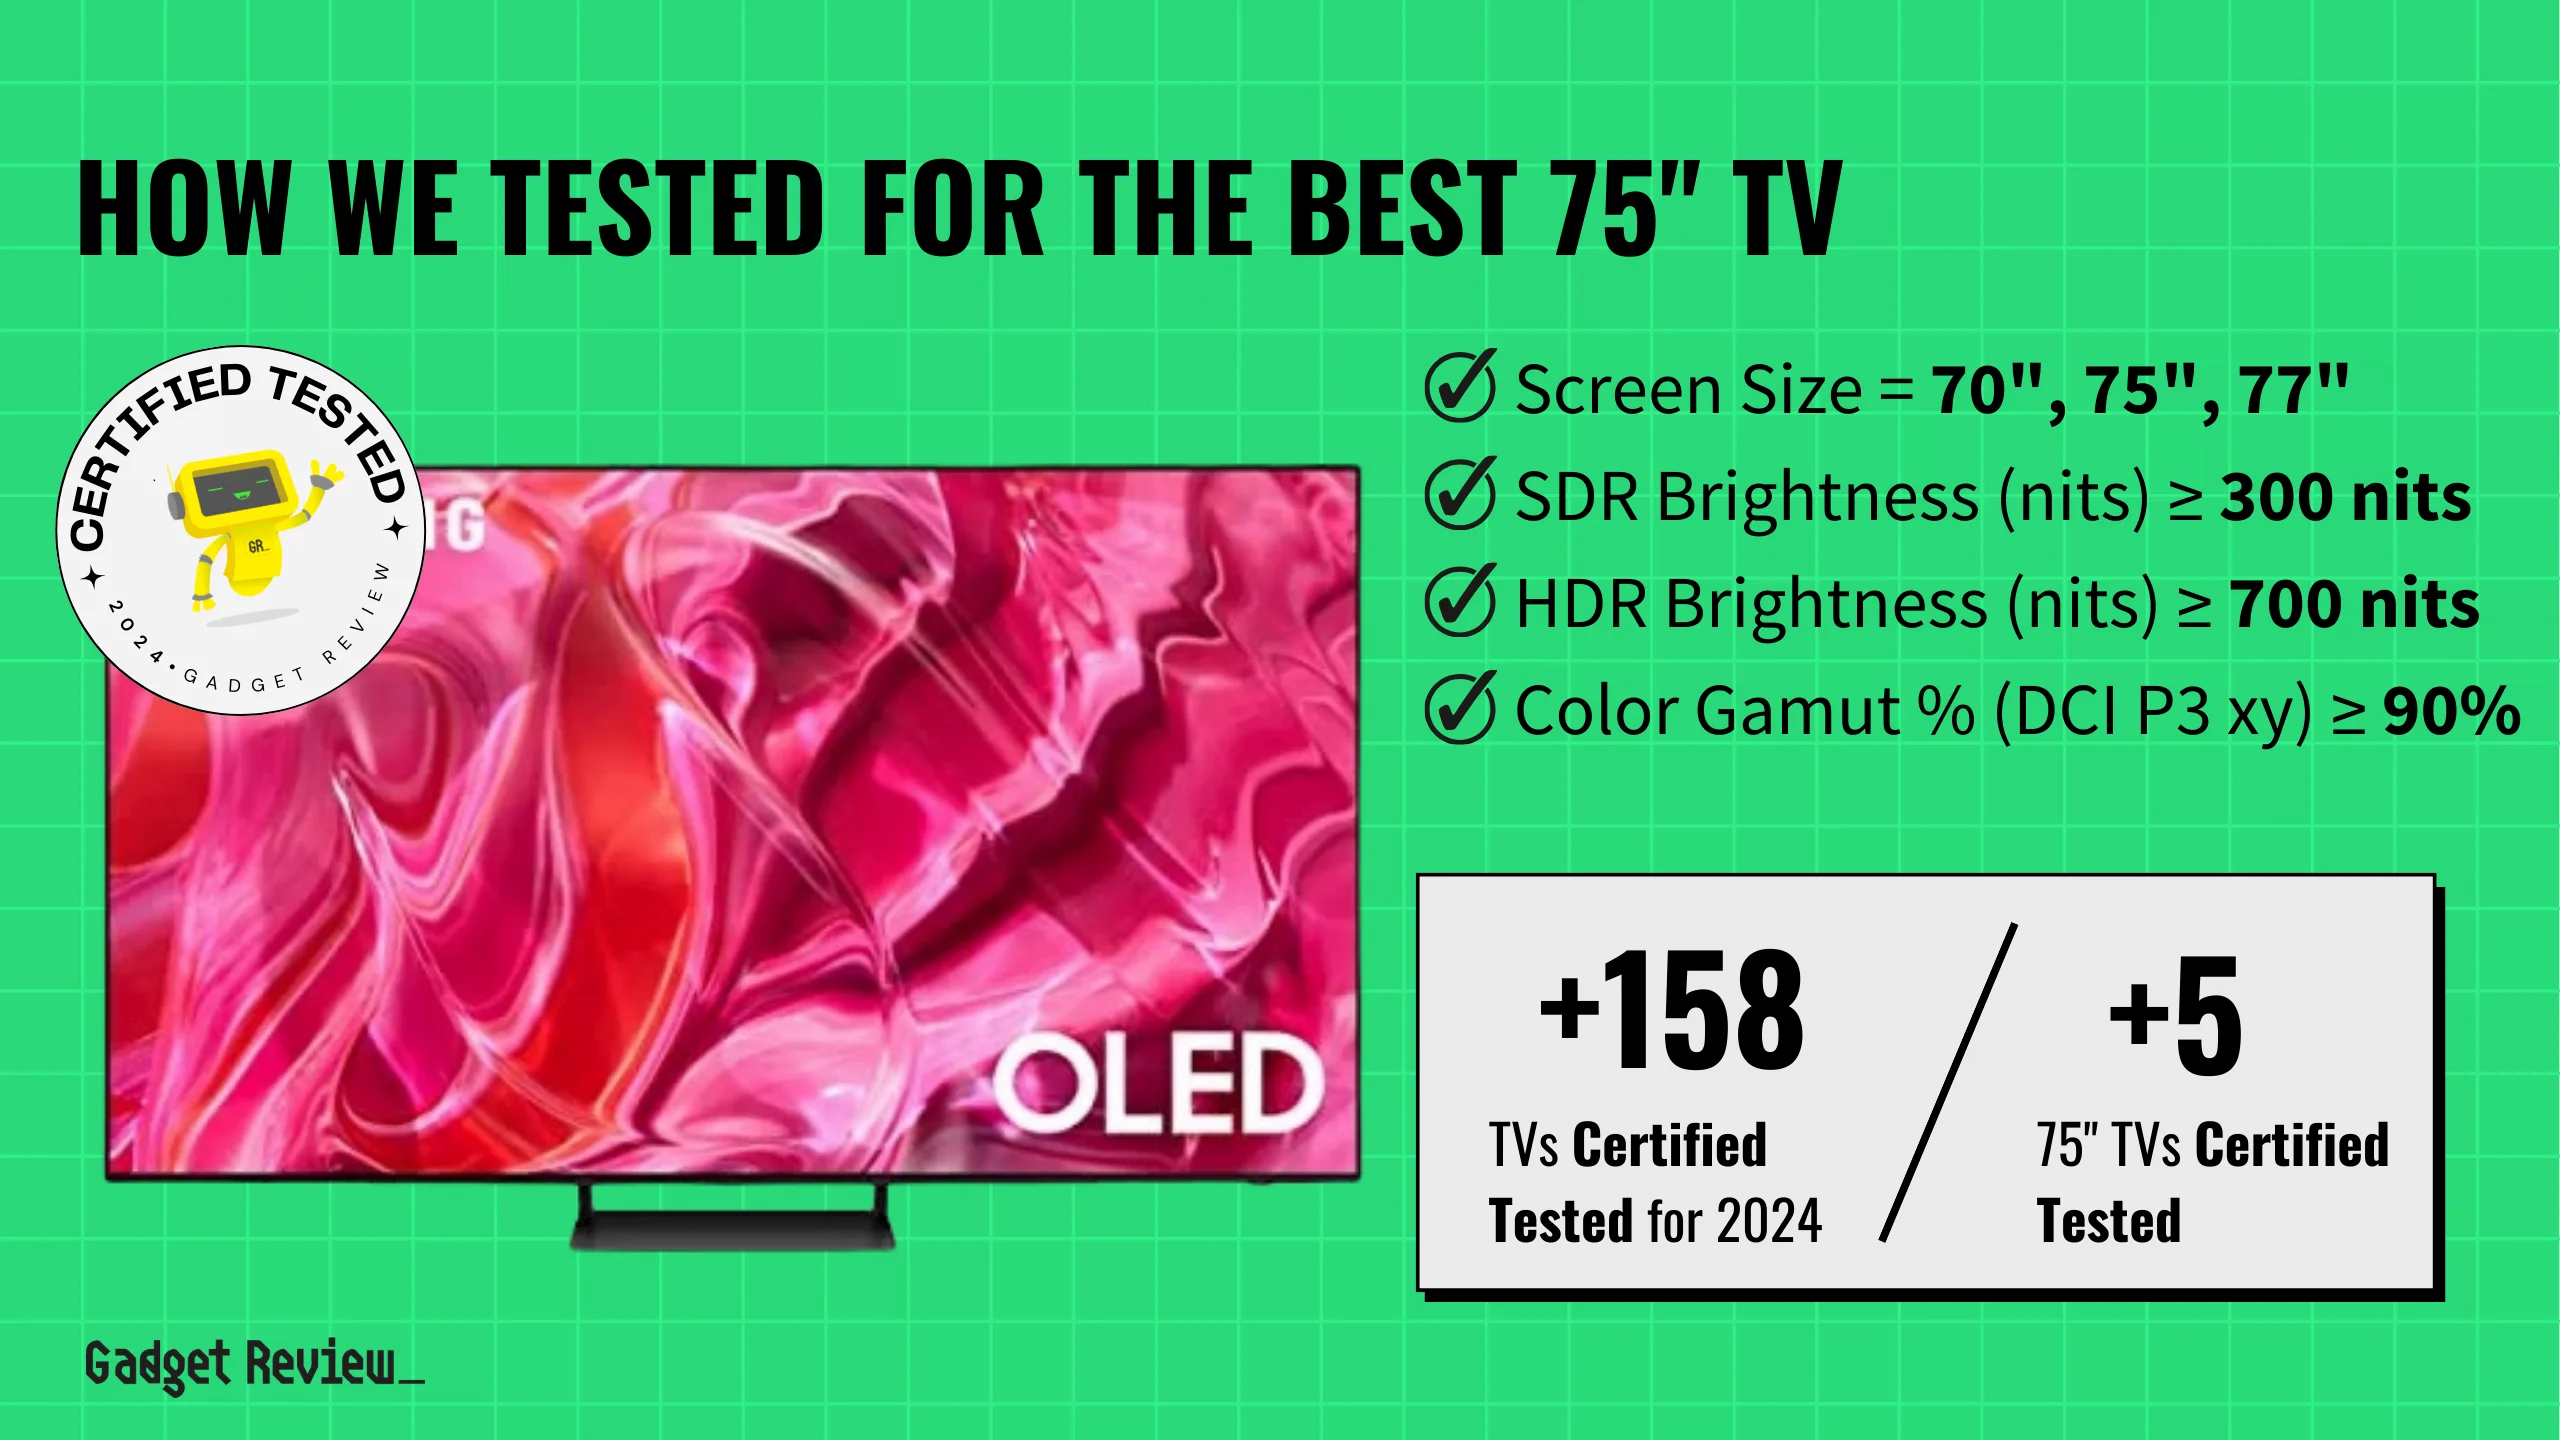 TV Backlight Vs. Brightness Differences In Picture Quality